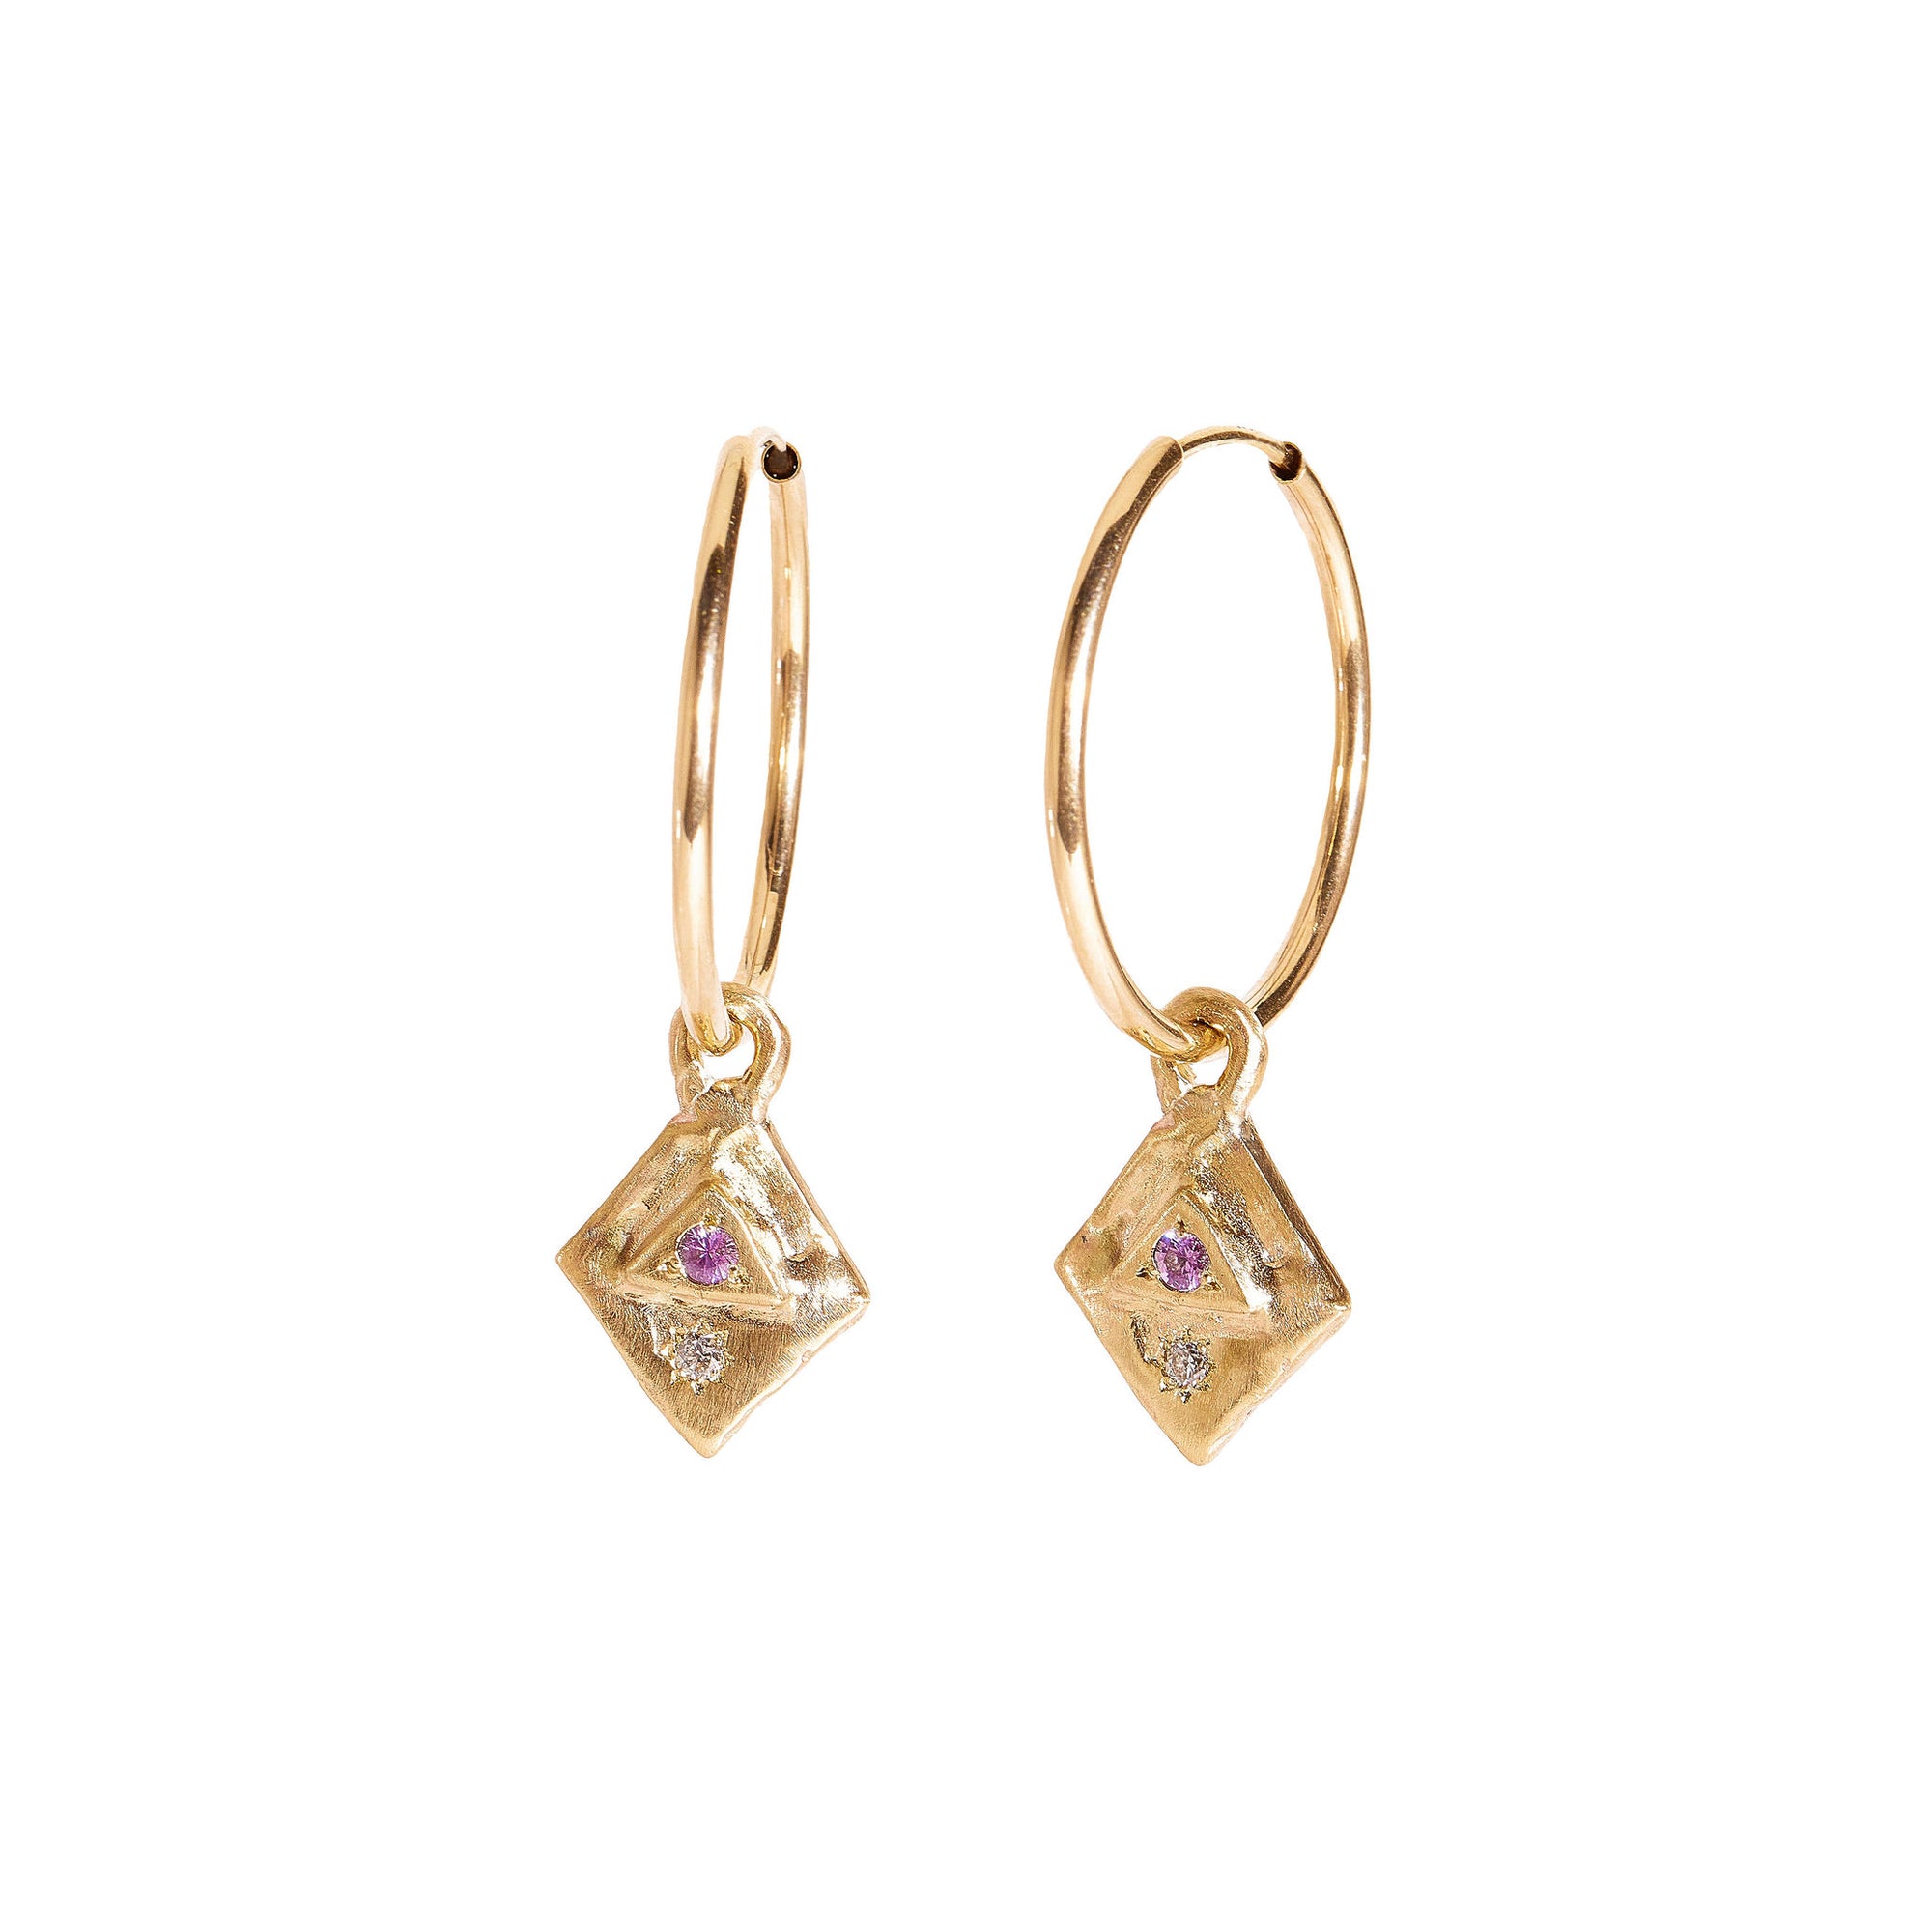  Pink Sapphire and Diamond Earrings in 9ct Yellow Gold 